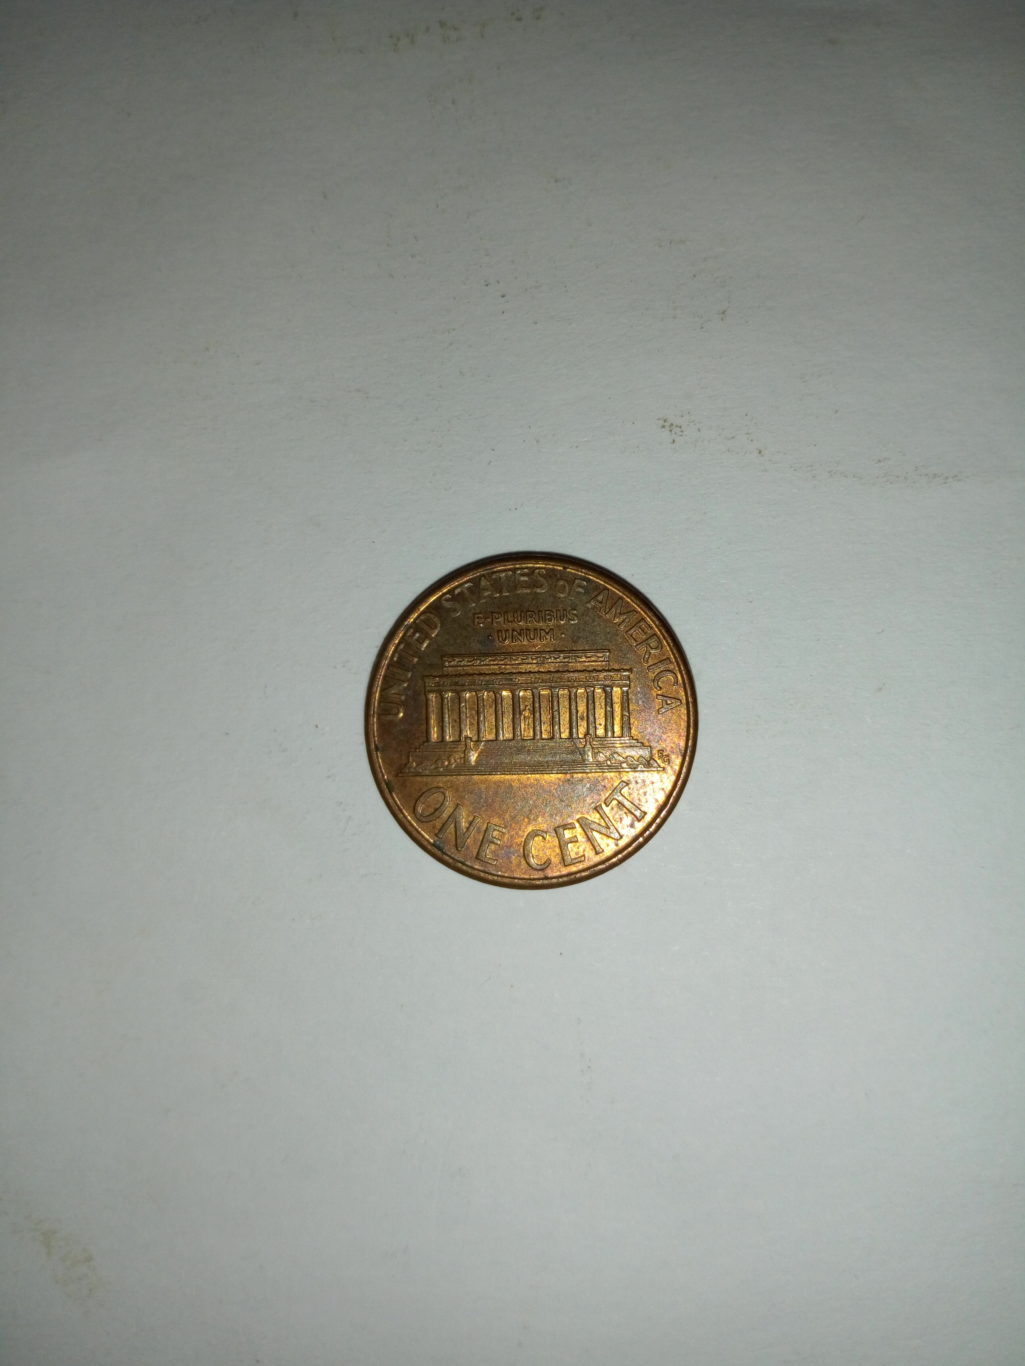 1998_united States of america 1 cents